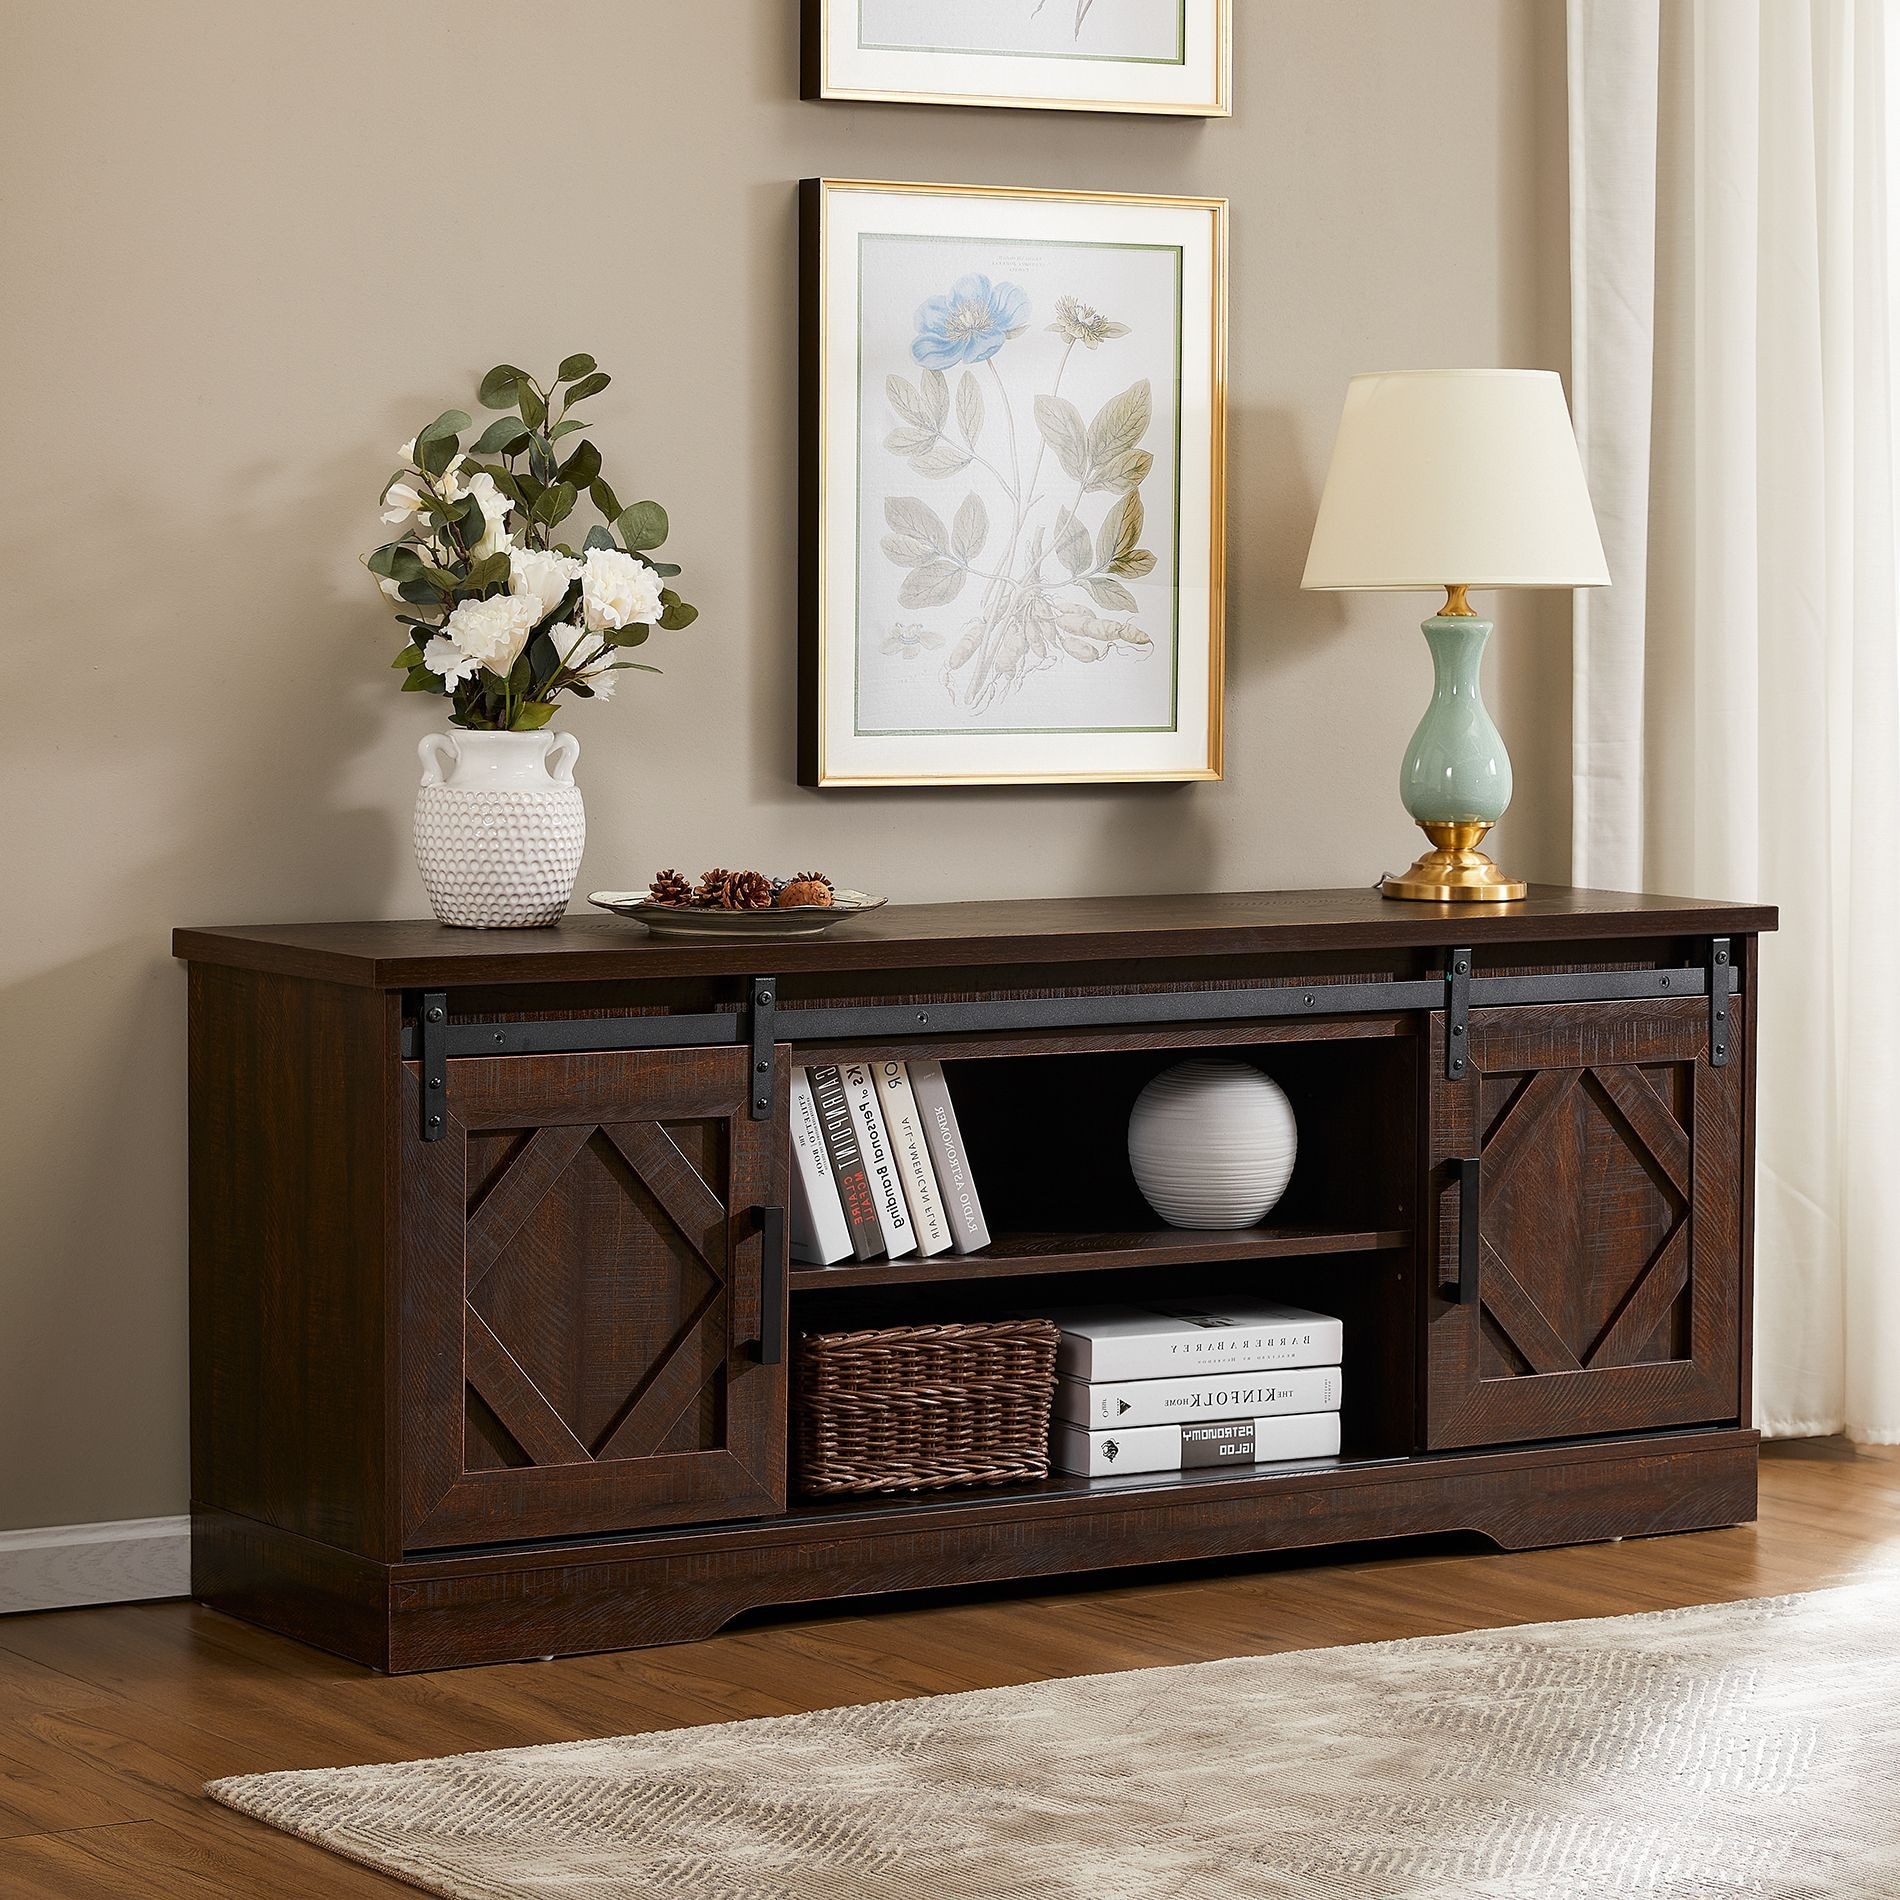 Details about   Rustic Farmhouse Sliding Barn Door TV Stand Console Table Storage for Up To 58" 